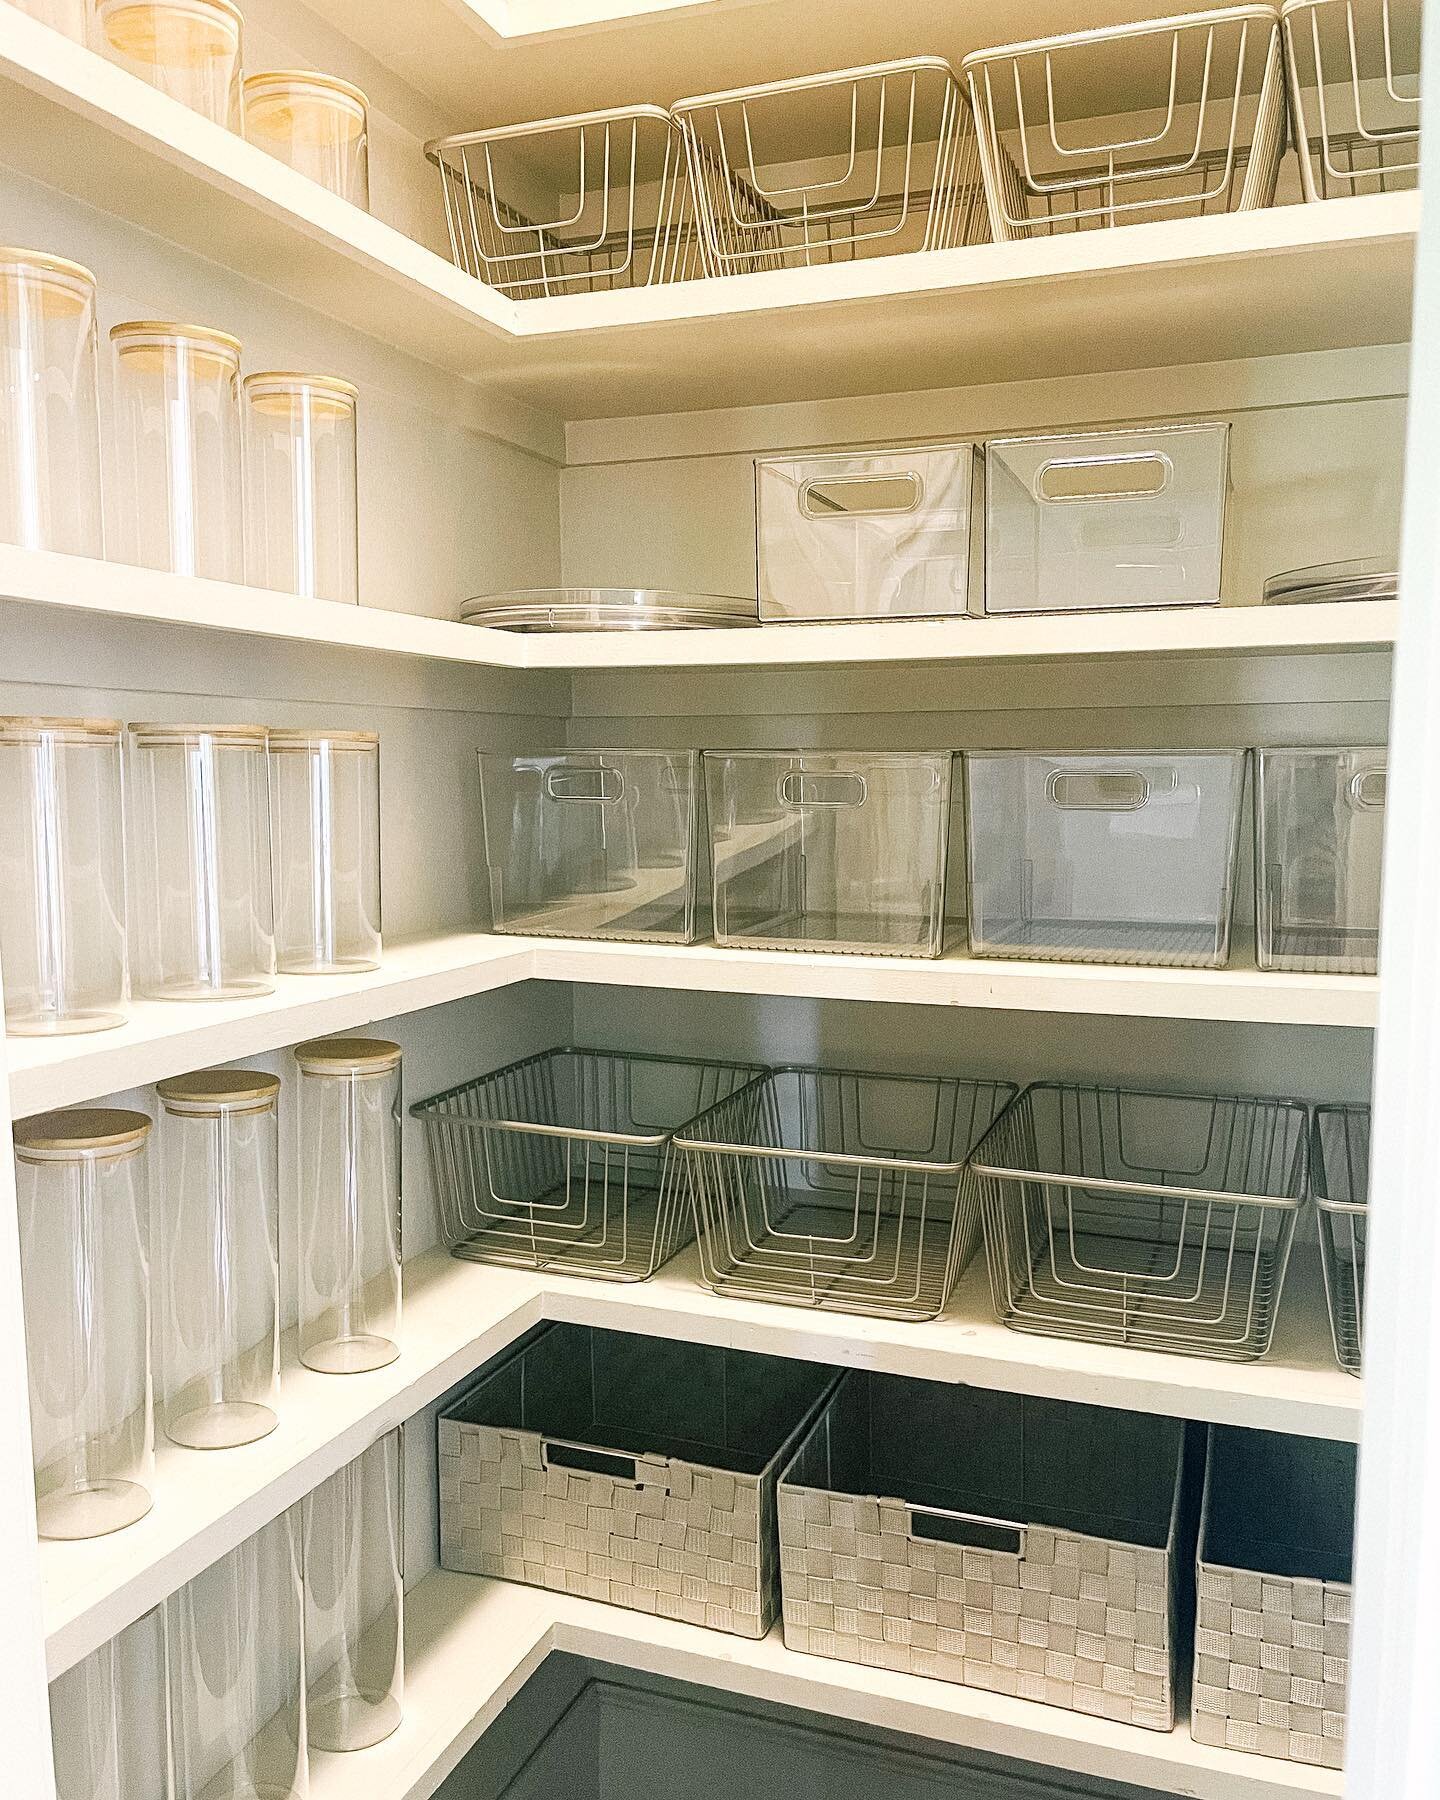 Did you know we pick organizing products that match the interior of your home? 🏡

Not only do we make sure the product is great quality and fits your space, but we want it to look beautiful, too! ✨

#tulsaorganizer #tulsaorganizing #tulsaorganizers 